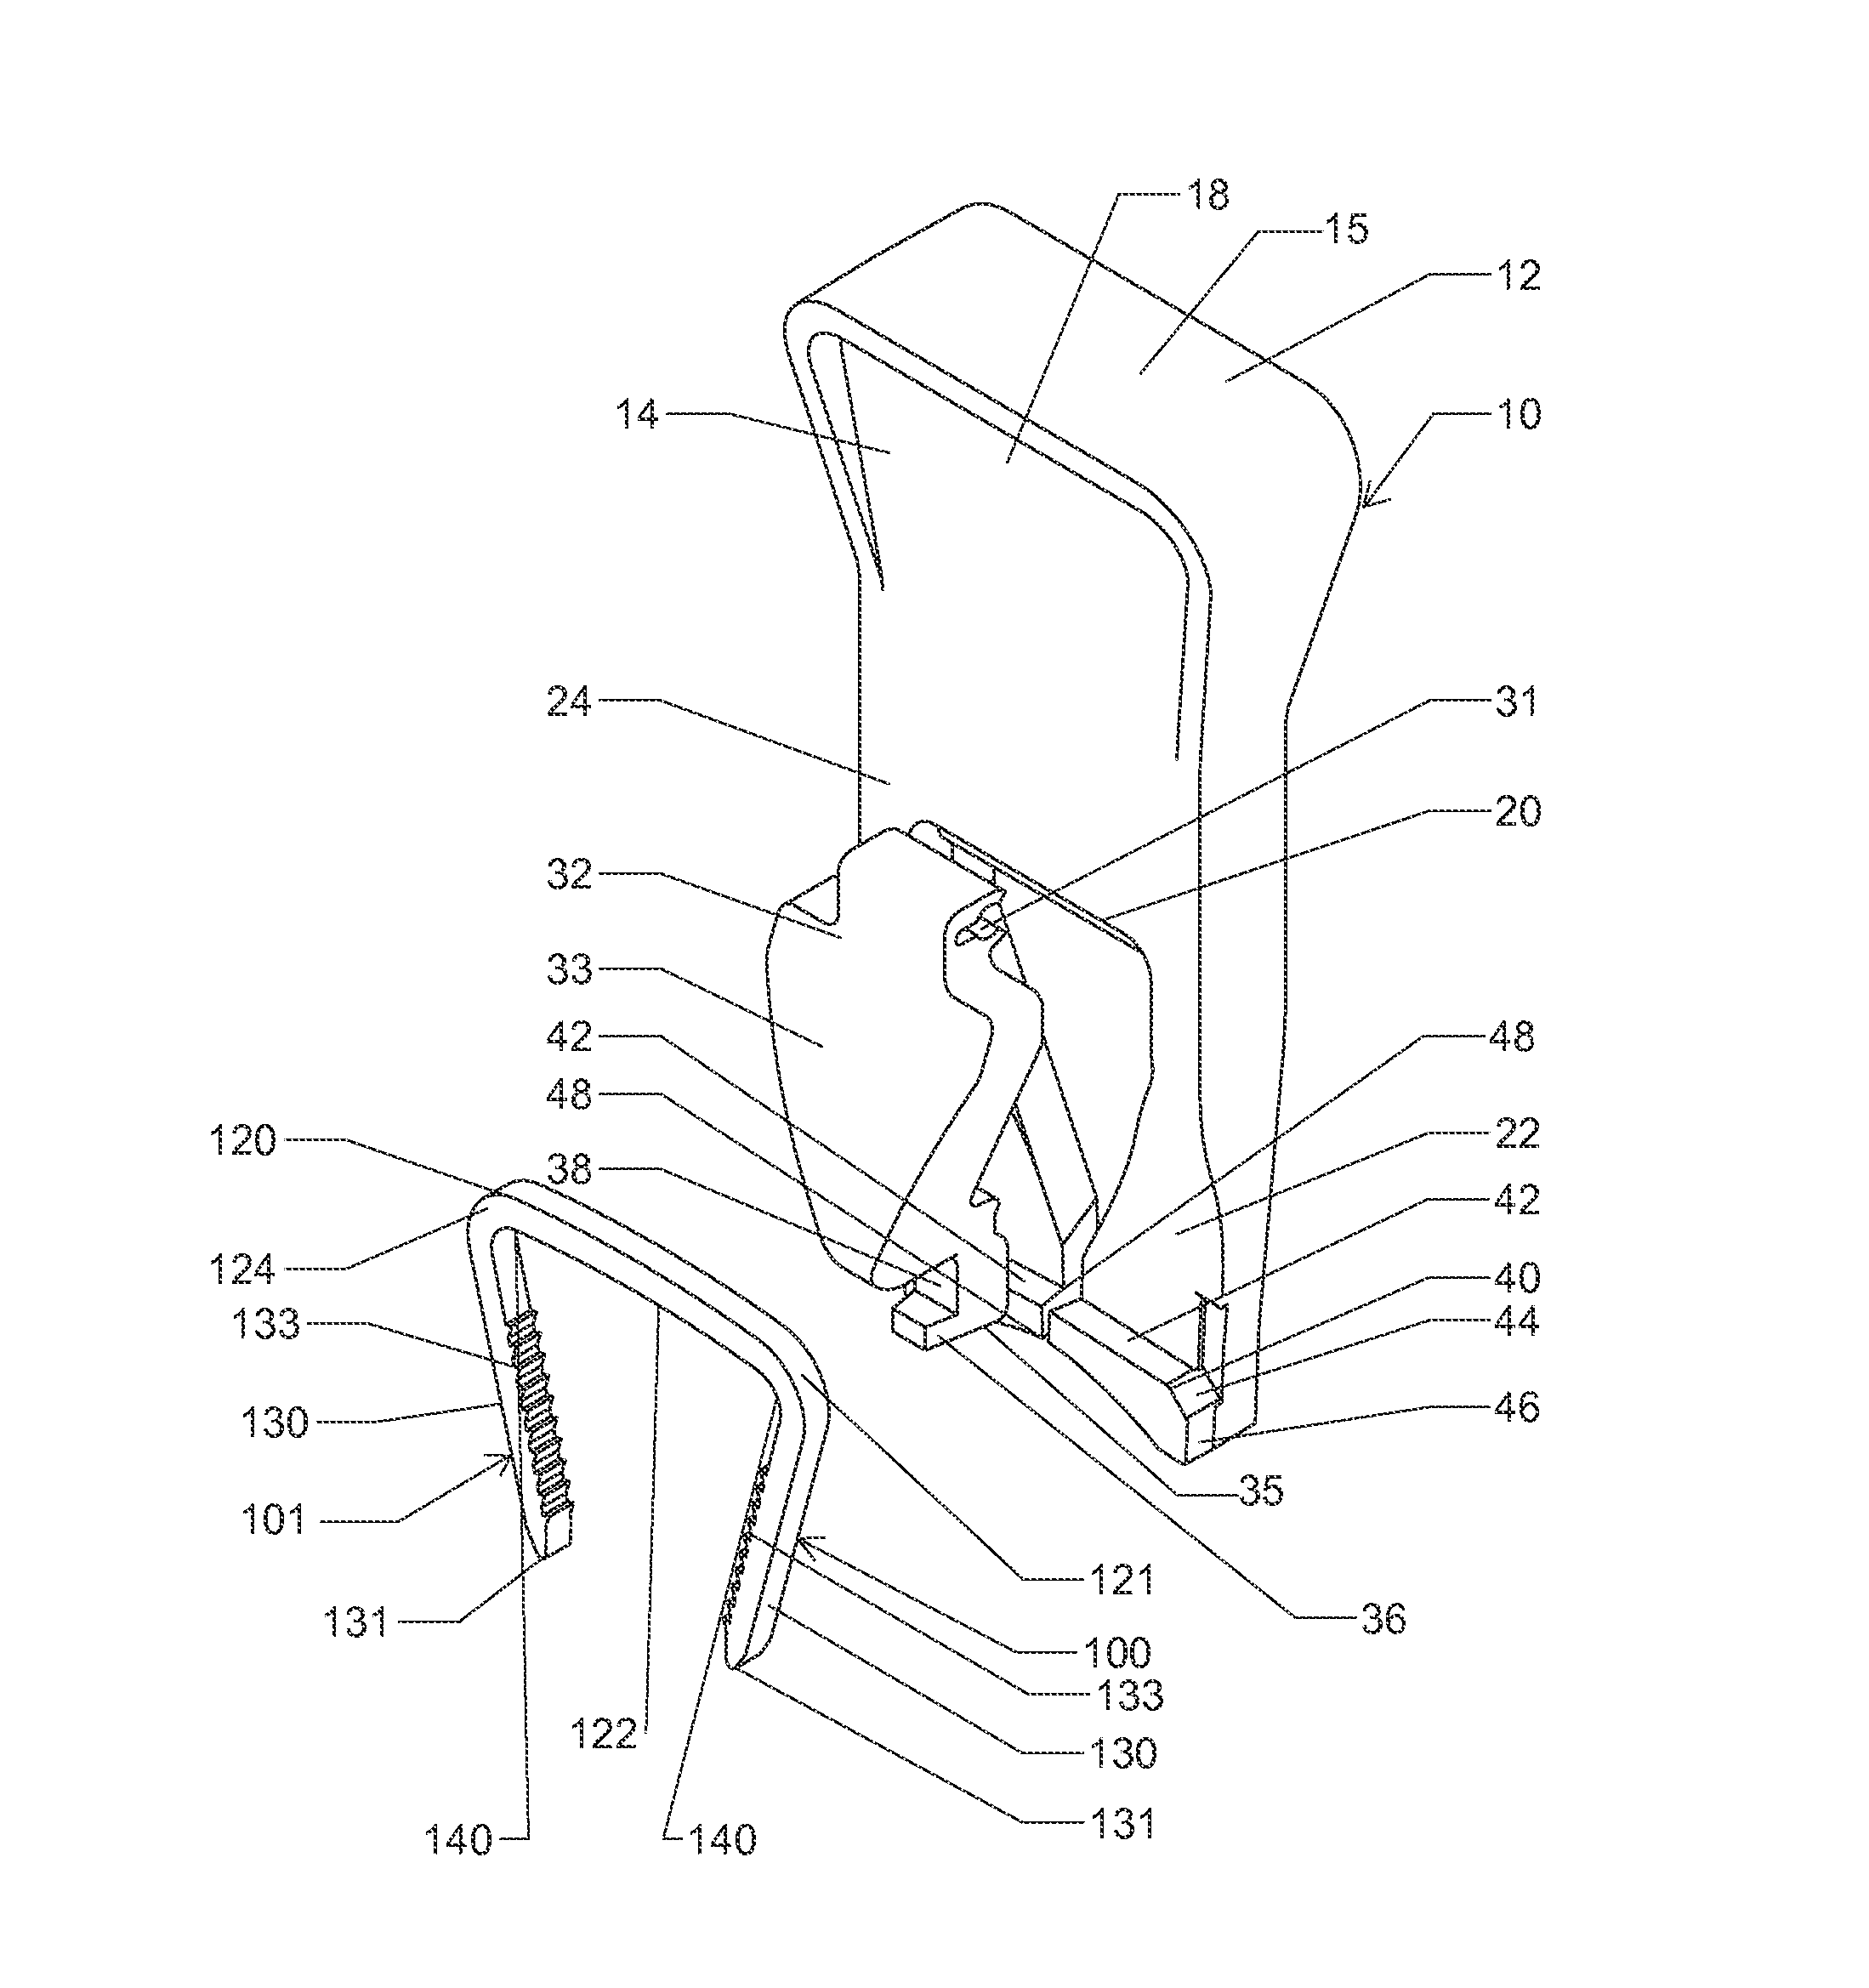 Method and apparatus for loading and implanting a shape memory implant